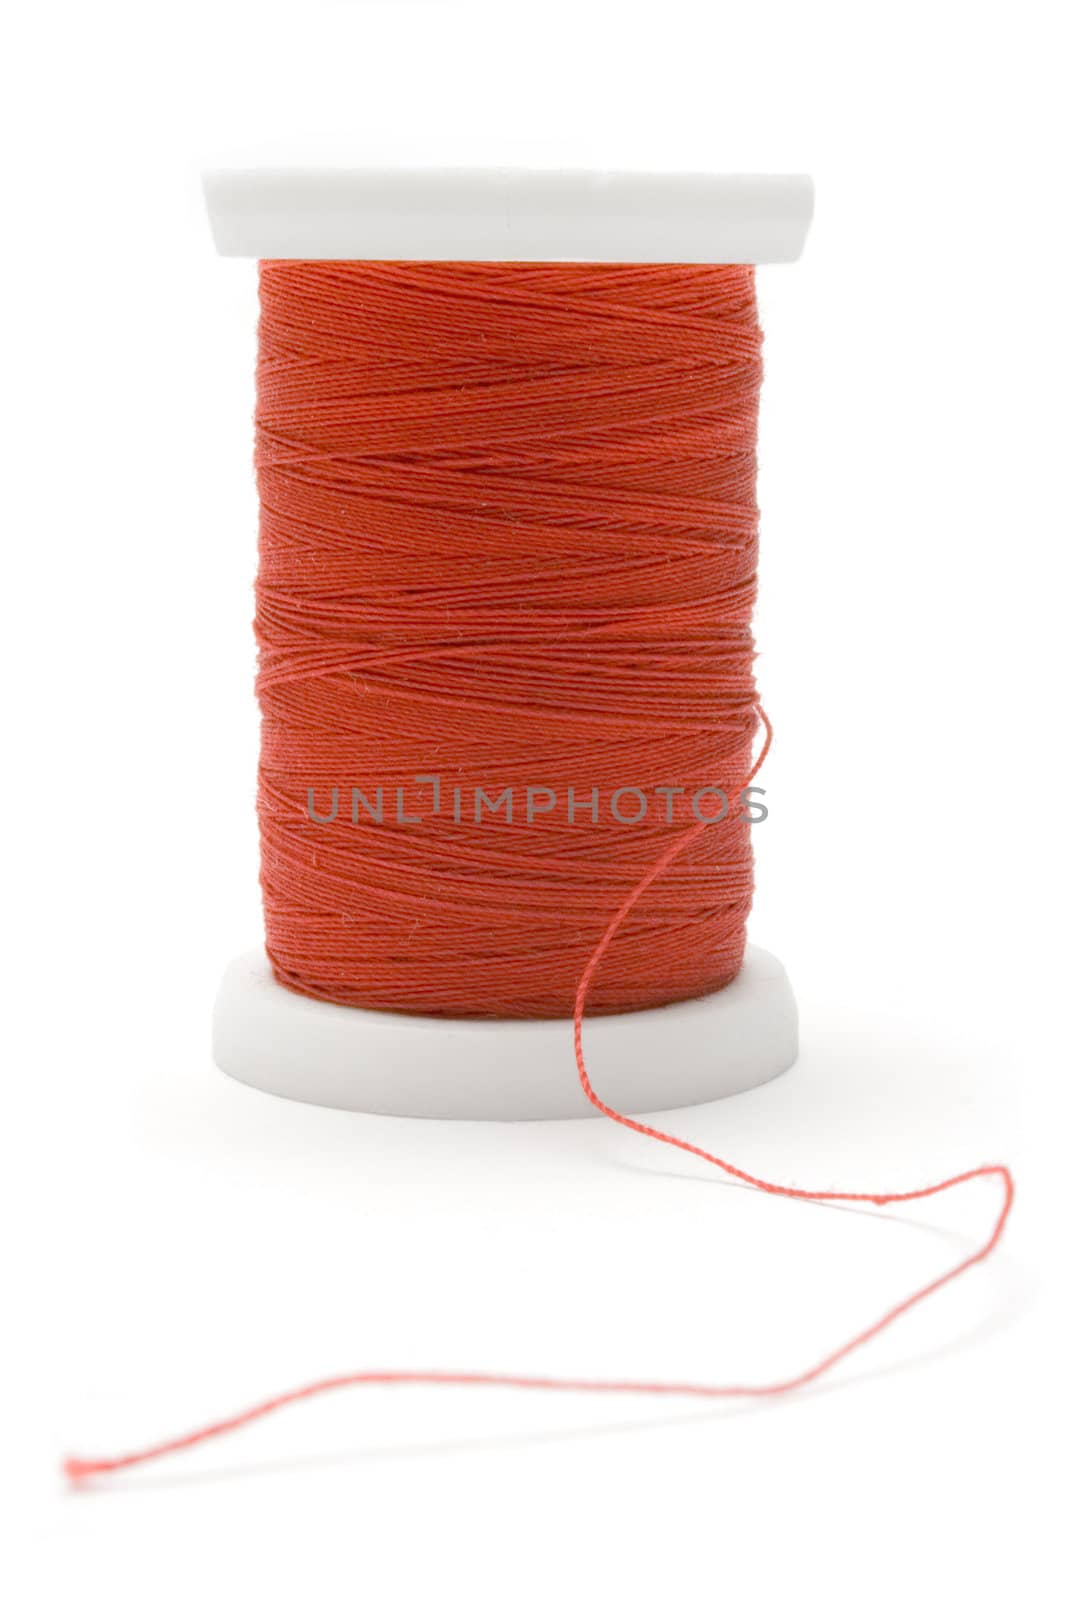 Red Thread by winterling